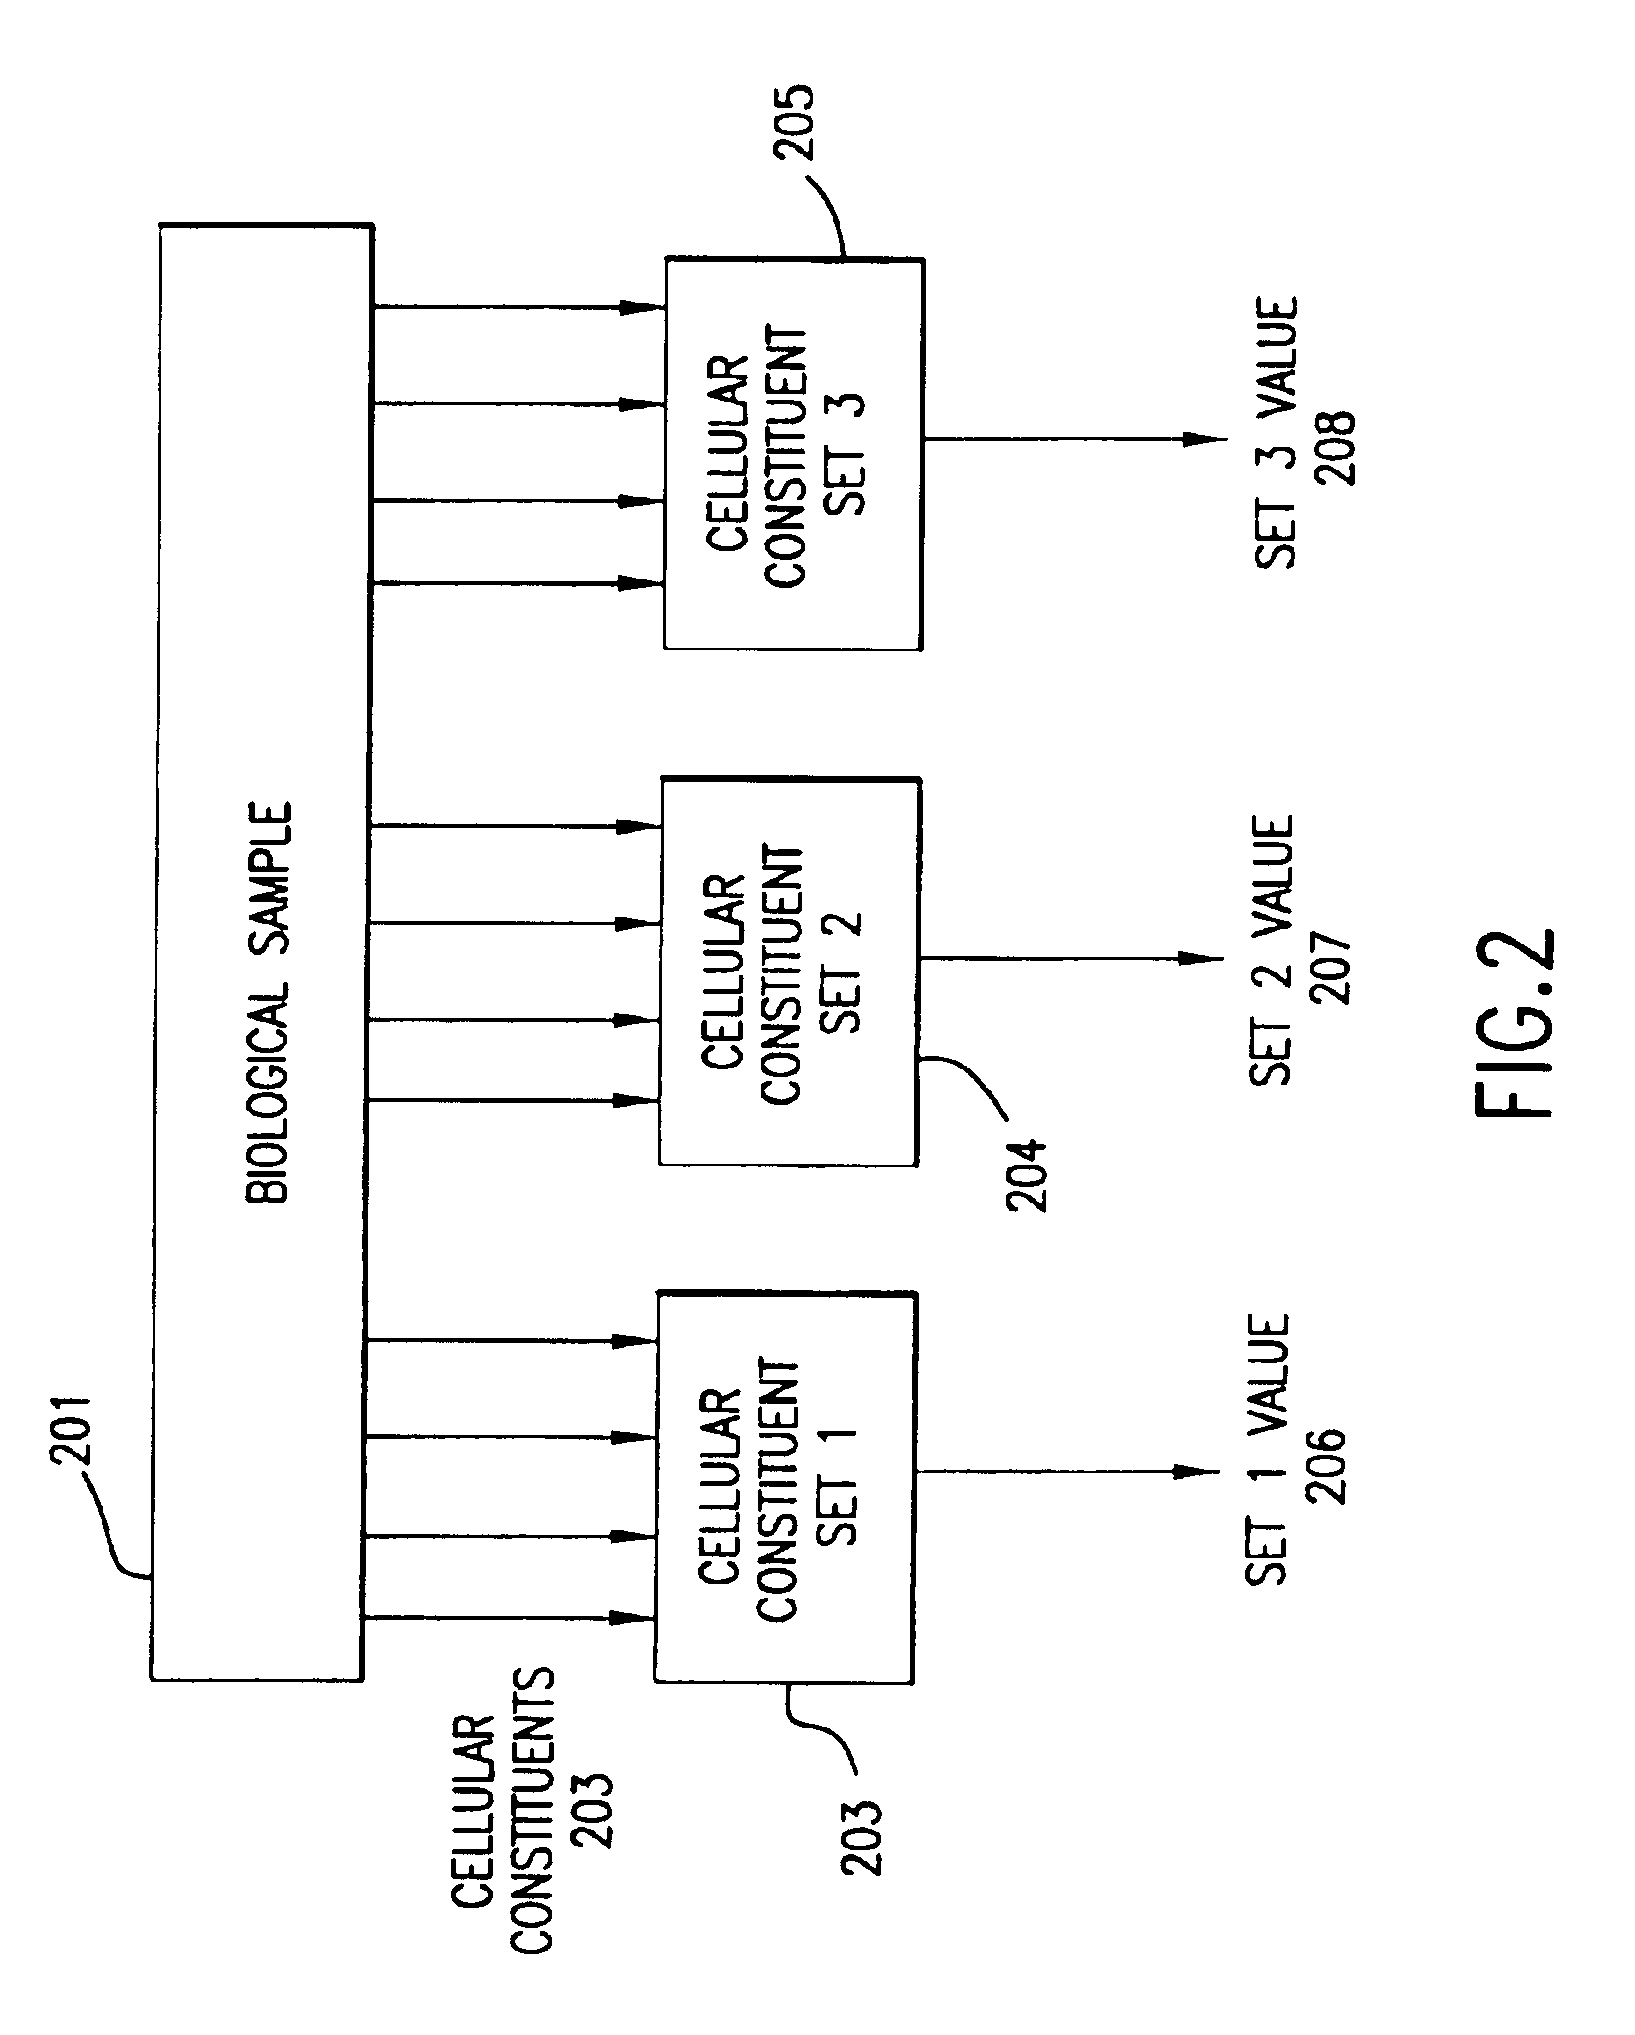 Methods for removing artifact from biological profiles